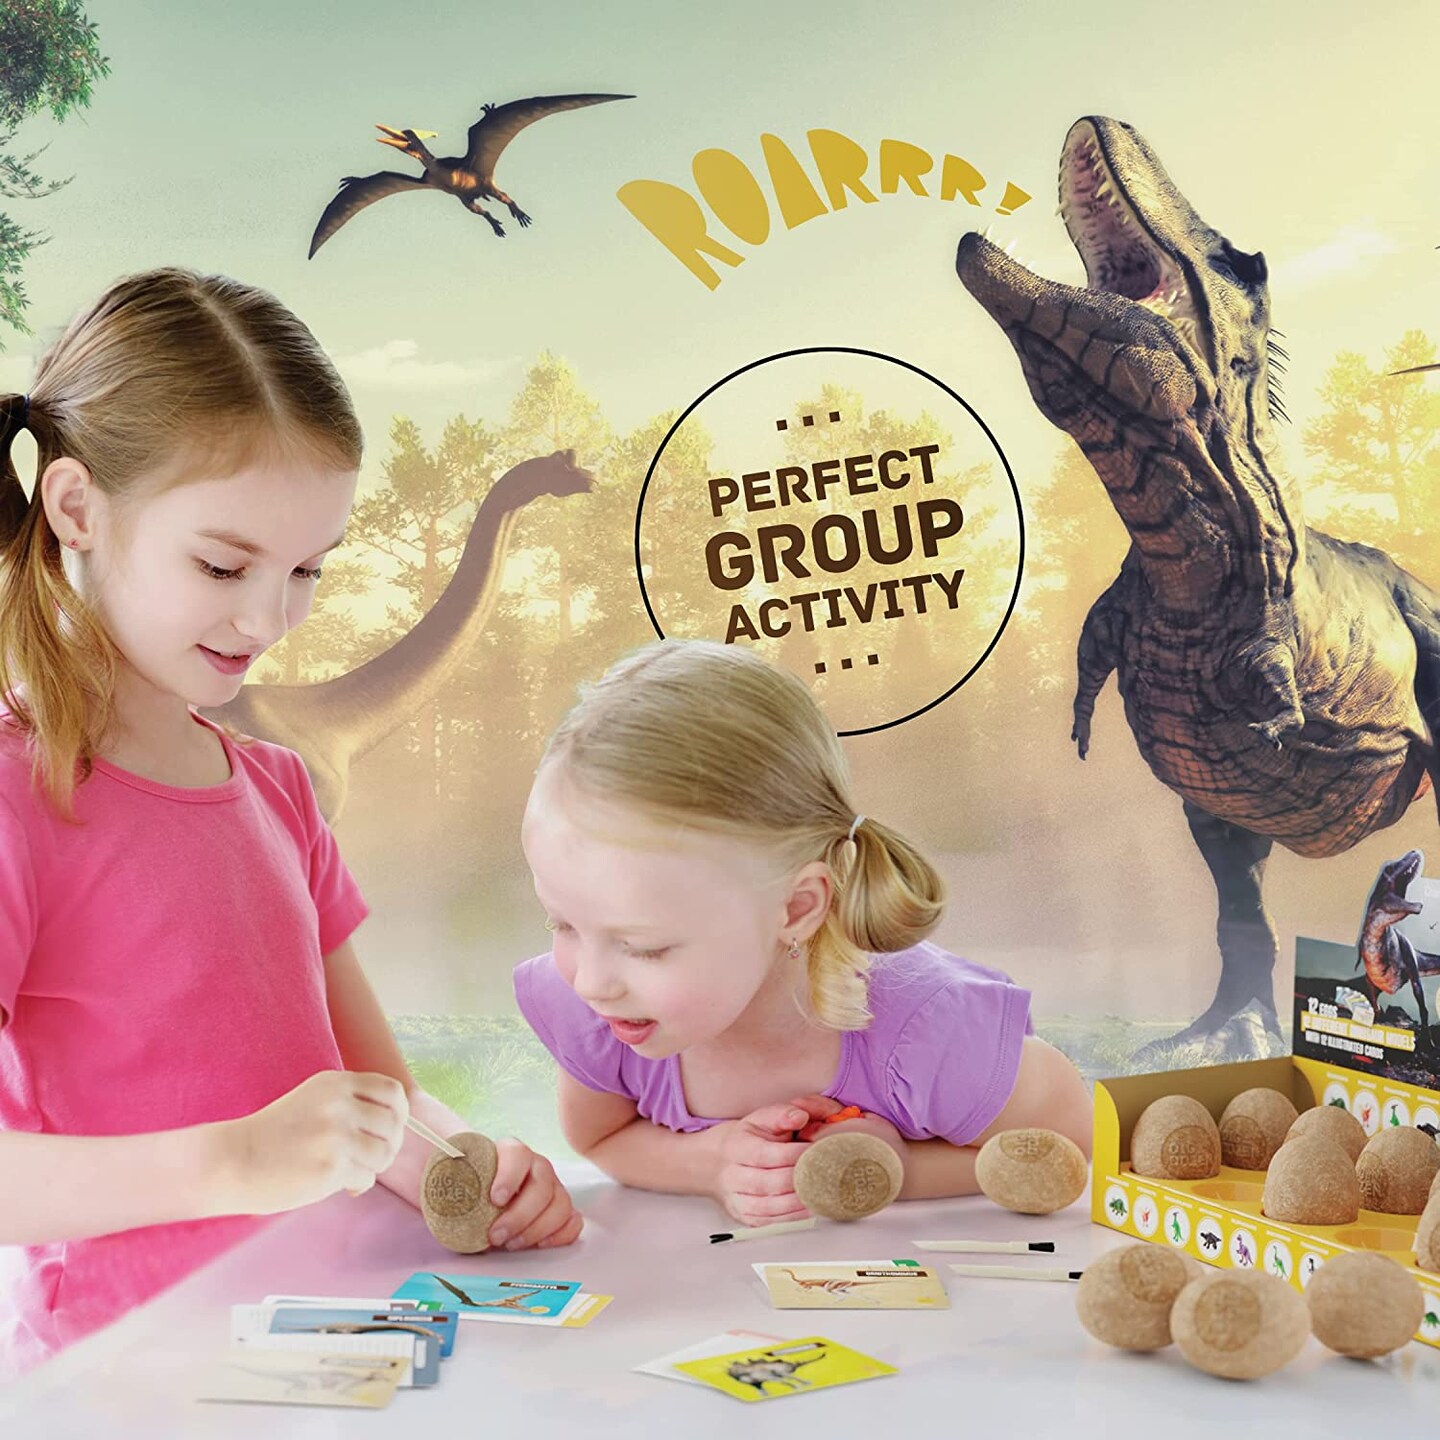 Dig a Dozen Dino Egg Dig Kit - Dinosaur Toys for Kids 3-12 Year Old Boys &#x26; Girls - 12 Easter Eggs &#x26; Surprise Dinosaurs. Science STEM Activities - Educational Boy Toy Party Gifts